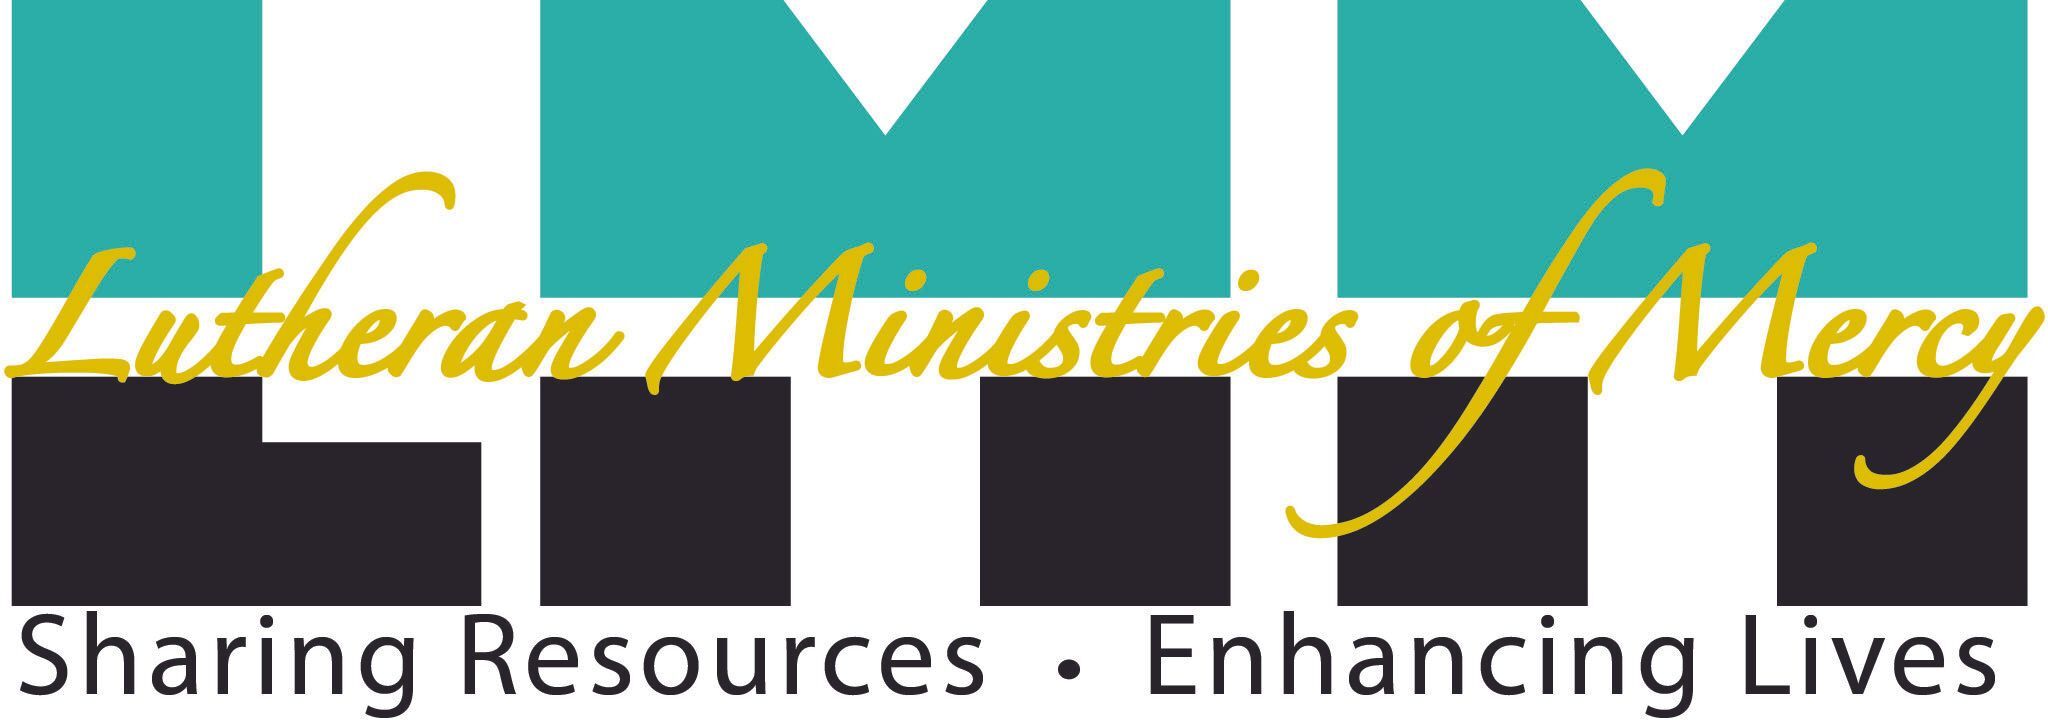 Lutheran Ministries of Mercy